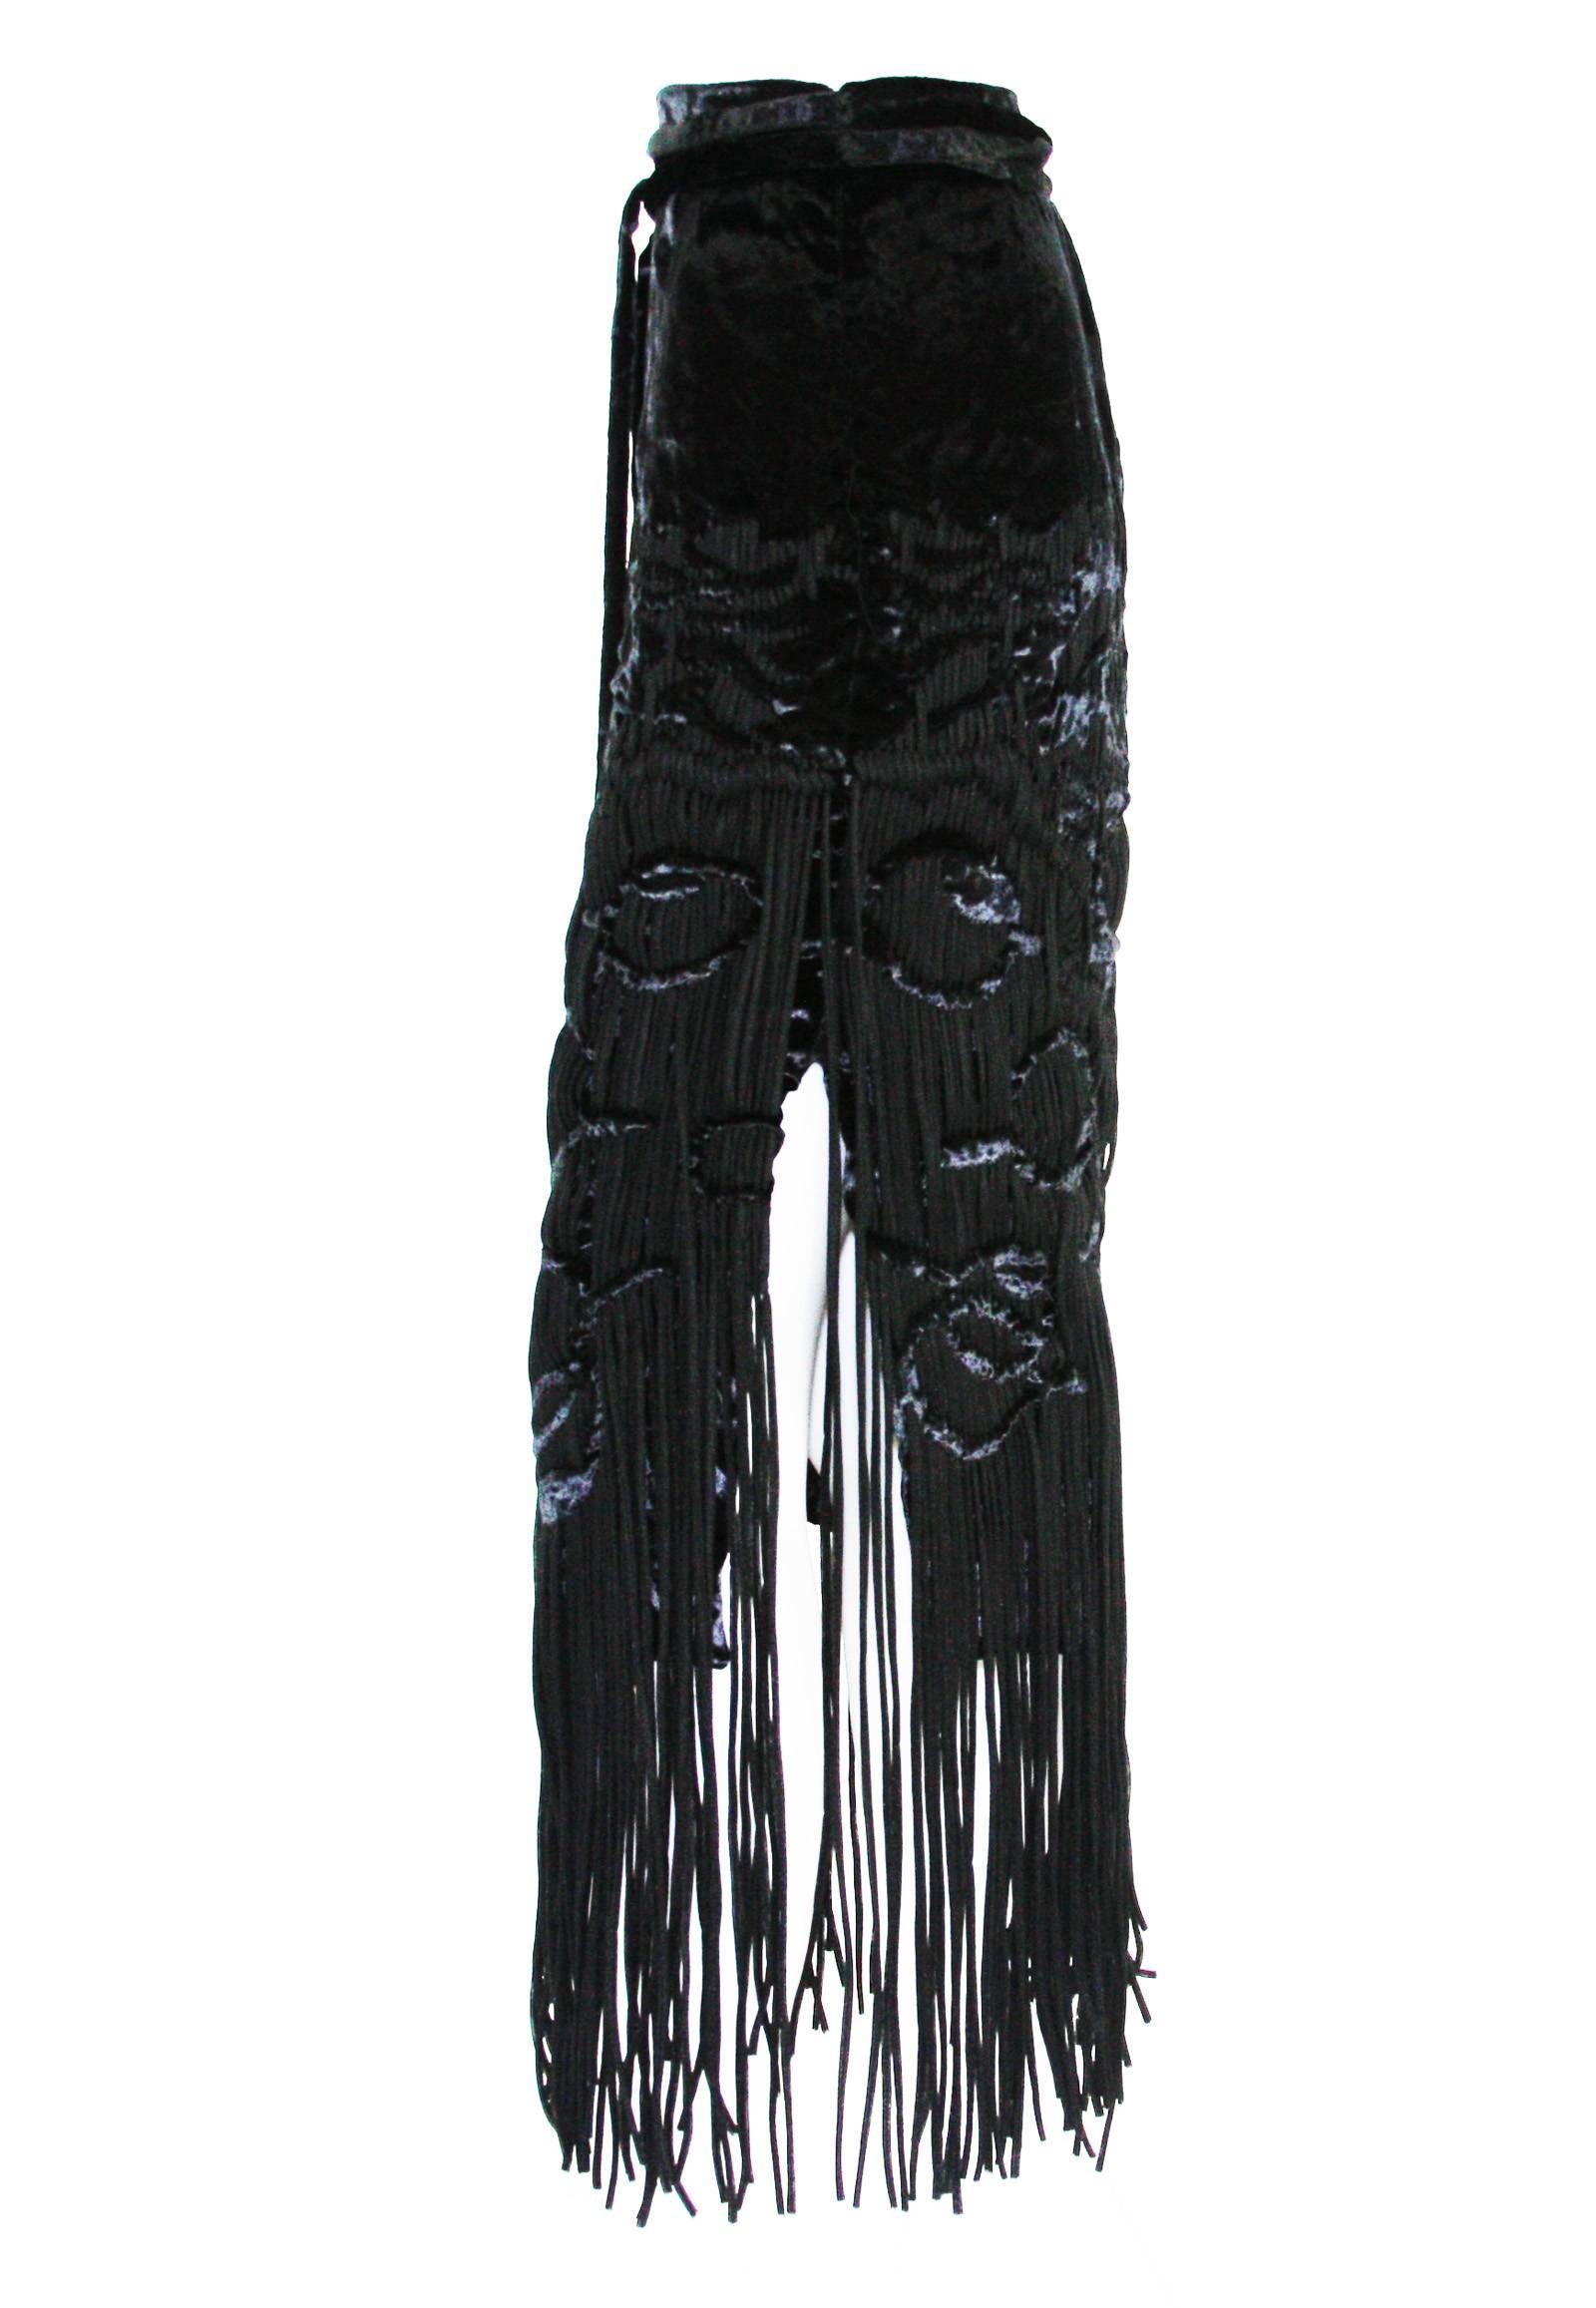 Tom Ford for Yves Saint Lauren Black Velvet Fringe Silk Skirt
F/W 2001 Runway Collection
French size 38 - US 6
The design of this skirt is extraordinary with the tassels being woven in and out of the crushed velvet.
The back includes an attached